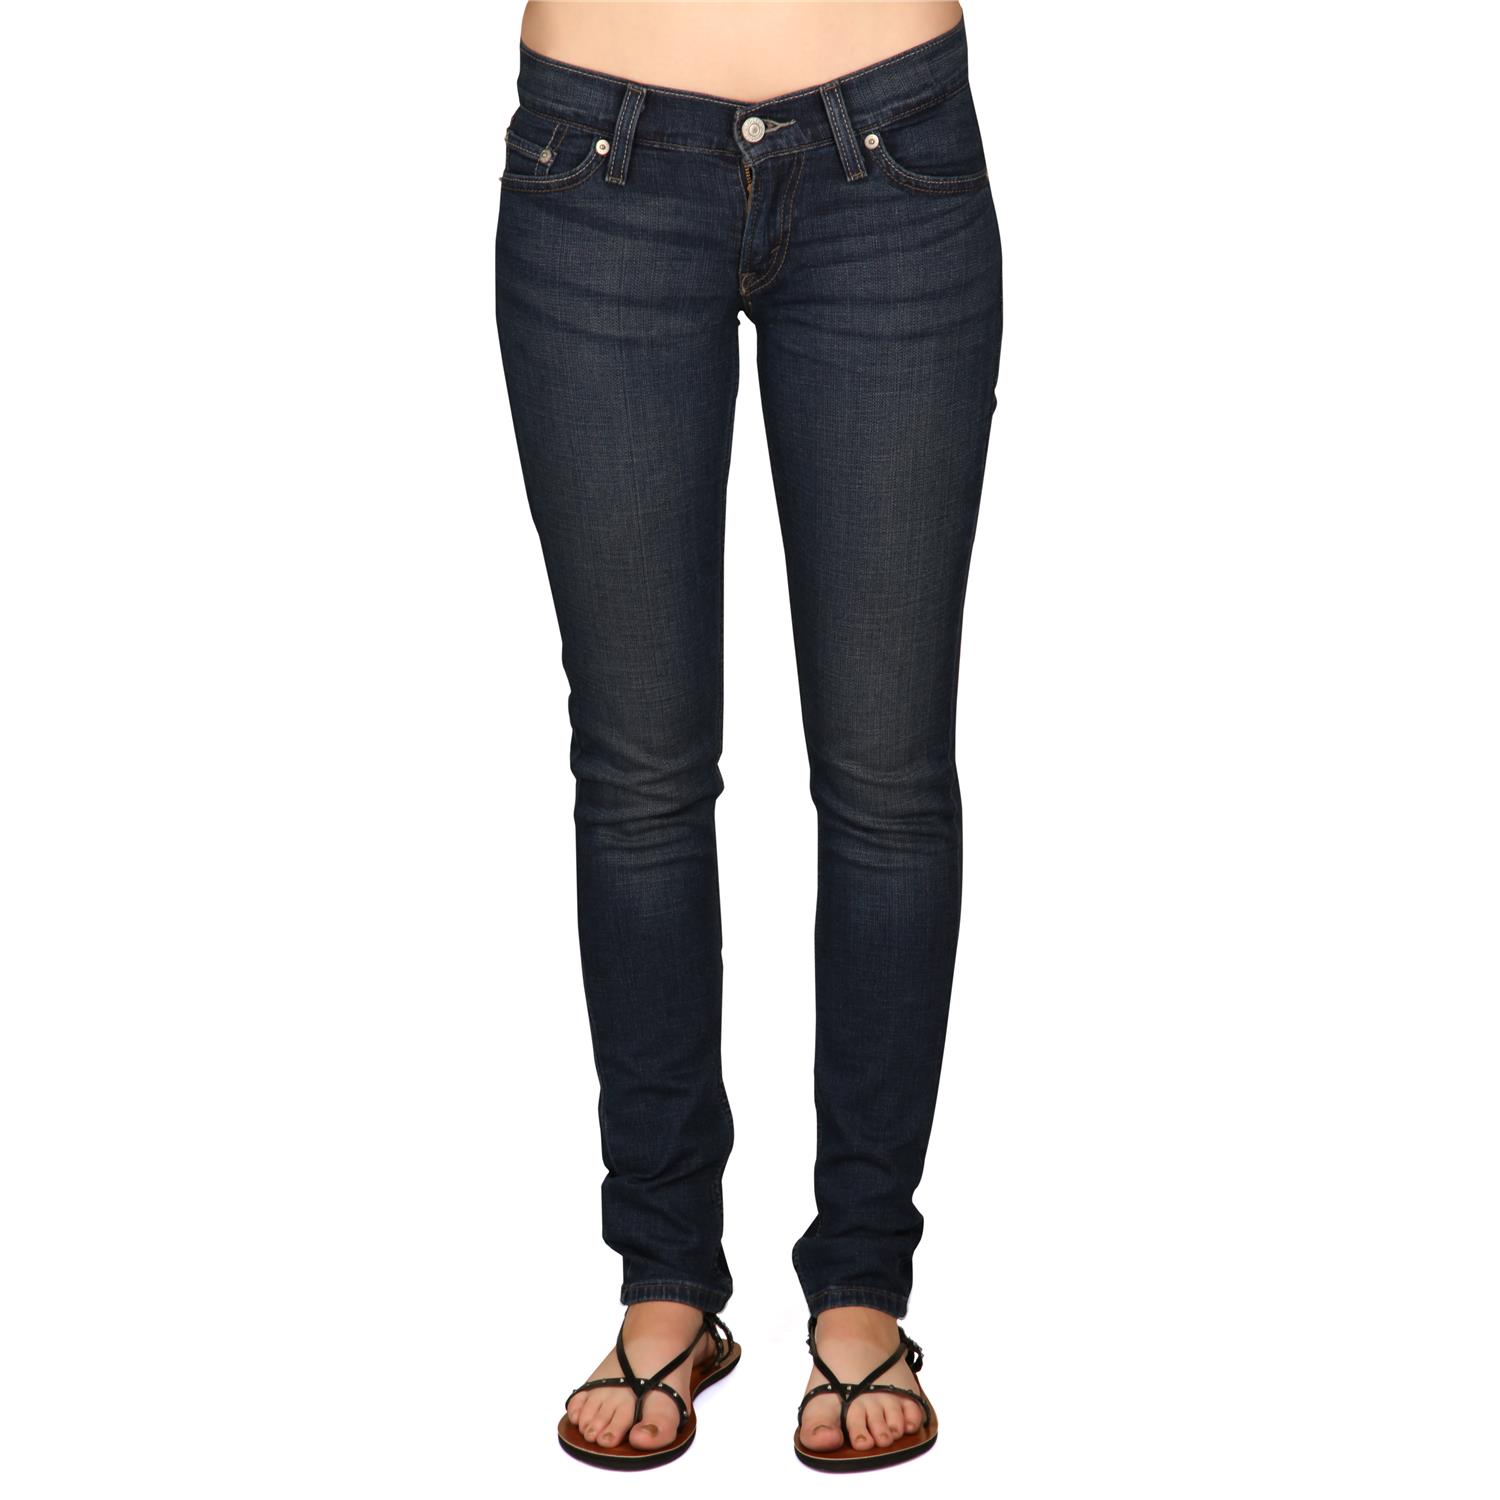 Levi's 524 Skinny Red Tab Jeans - Women's | evo outlet